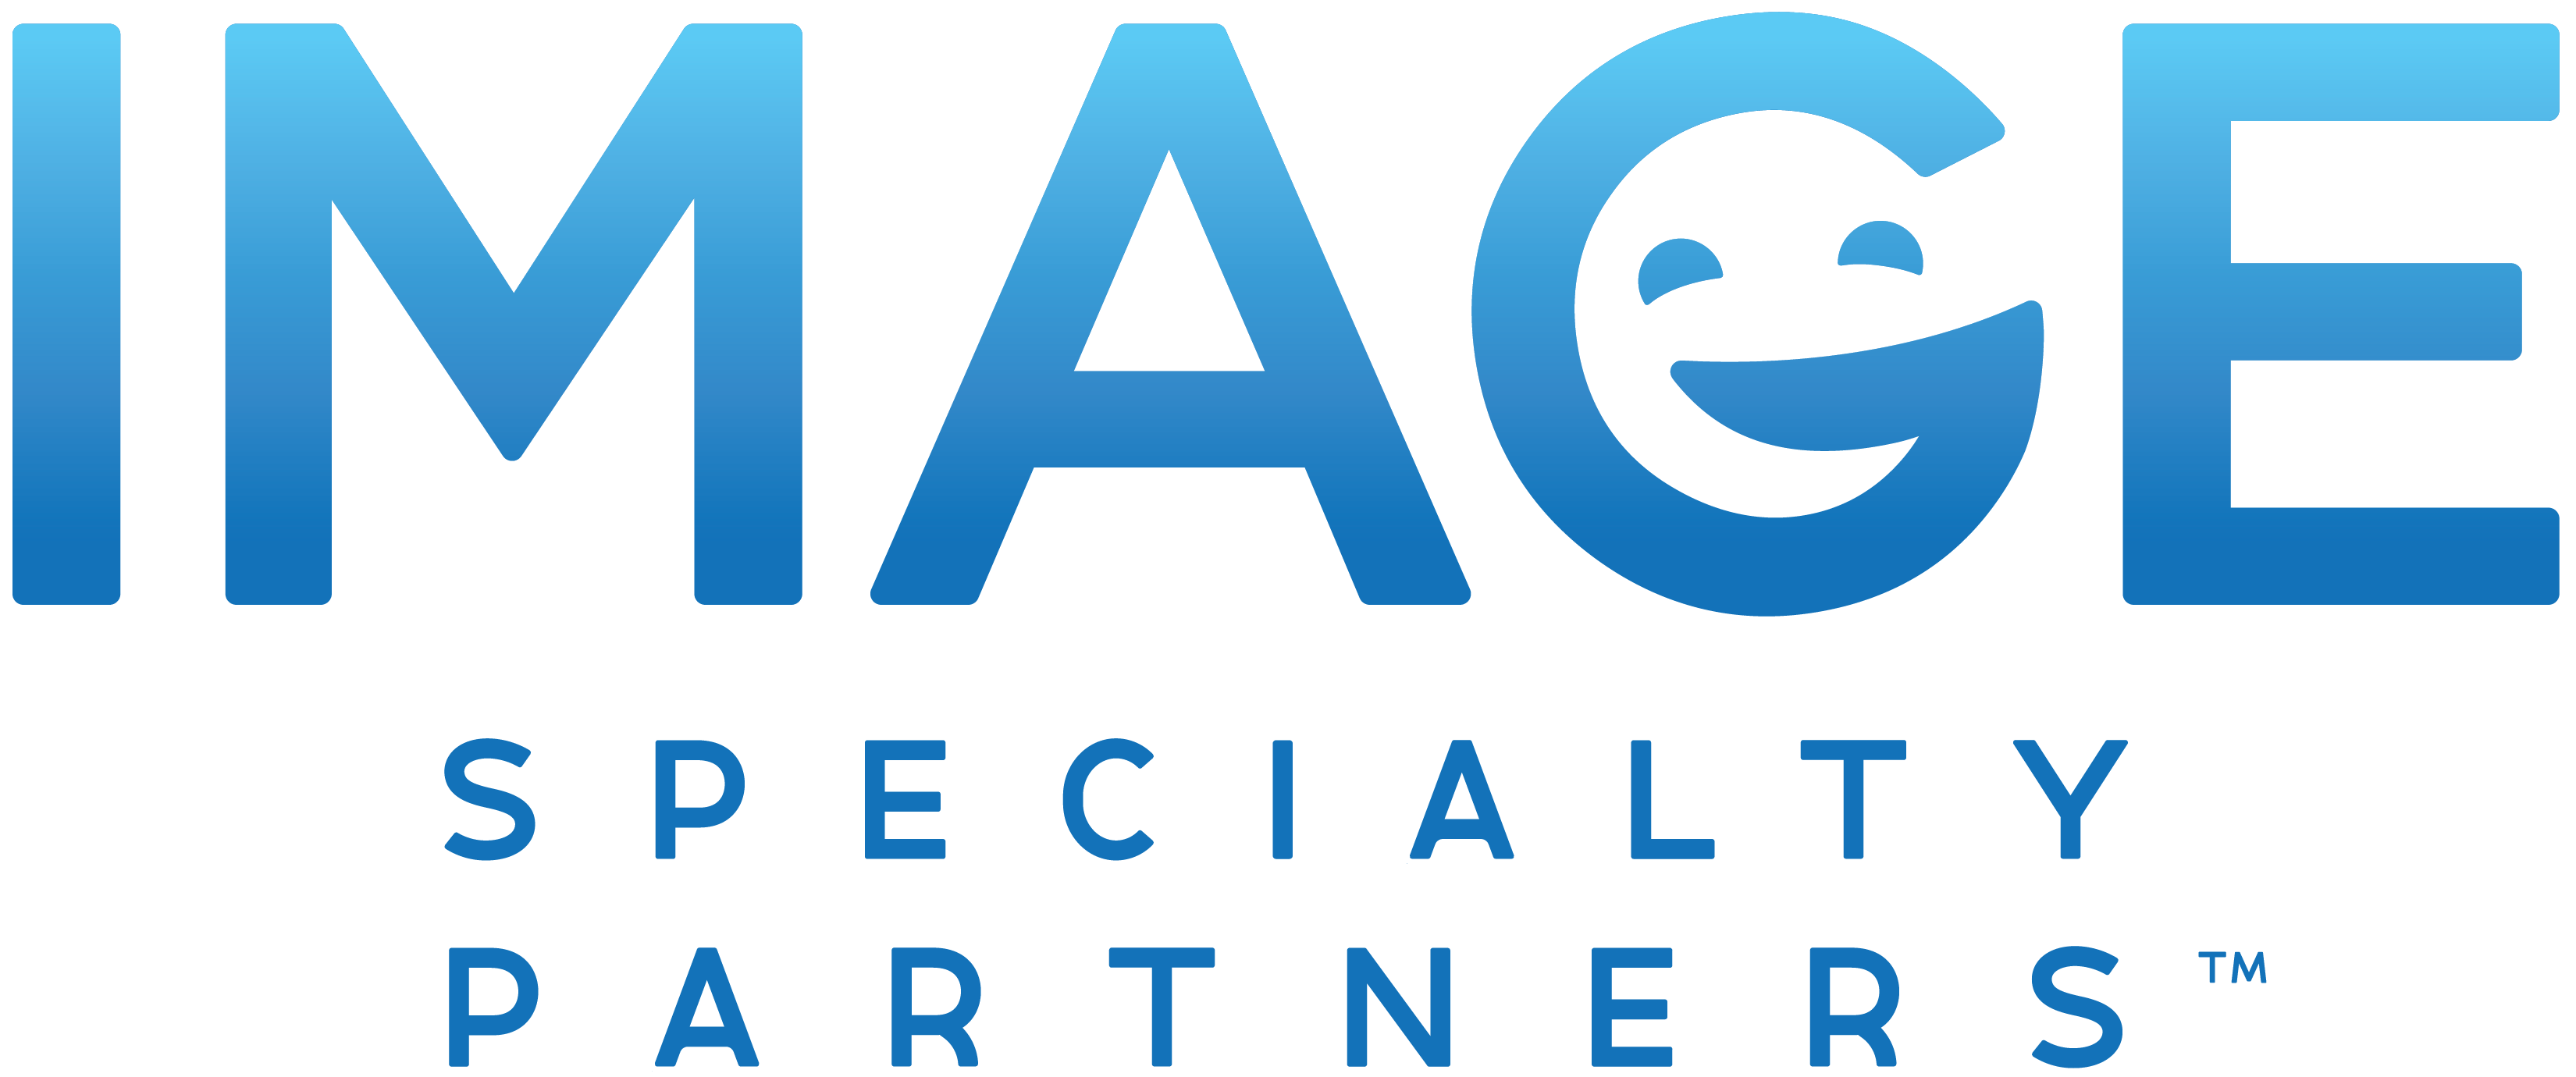 Image Specialty Partners™ Continues to Expand on the West Coast